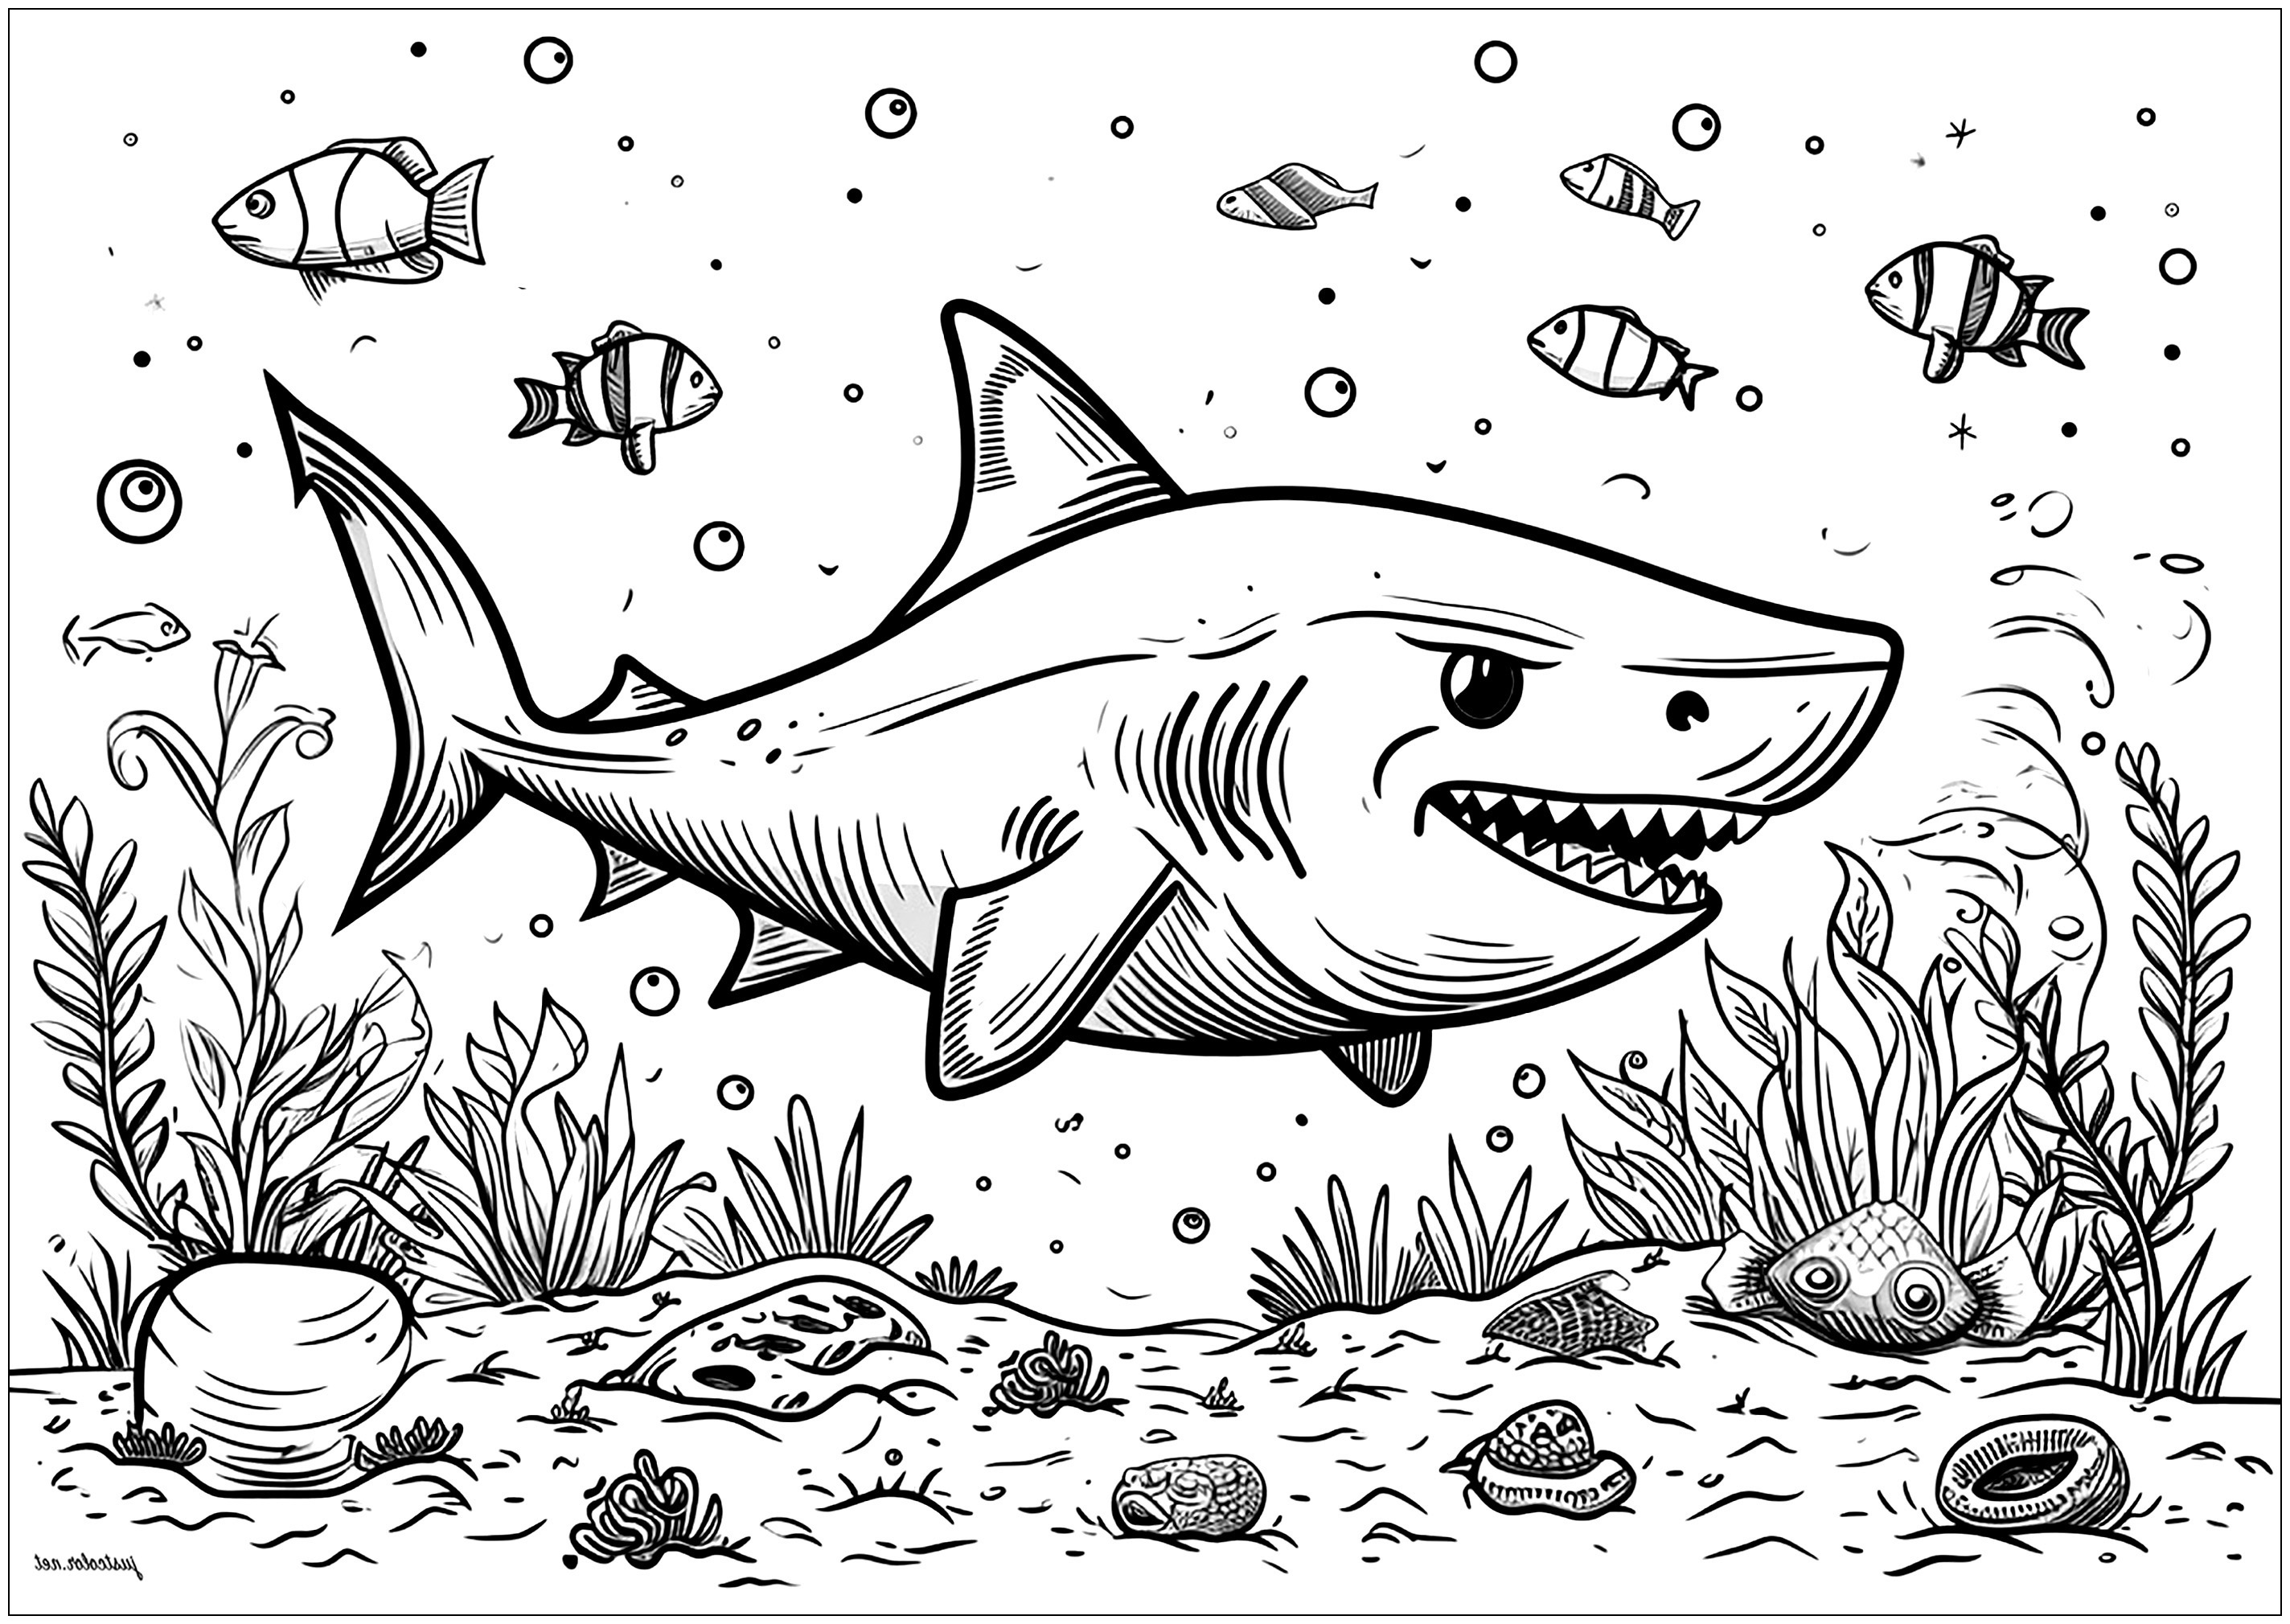 Sharp-toothed shark surrounded by fish